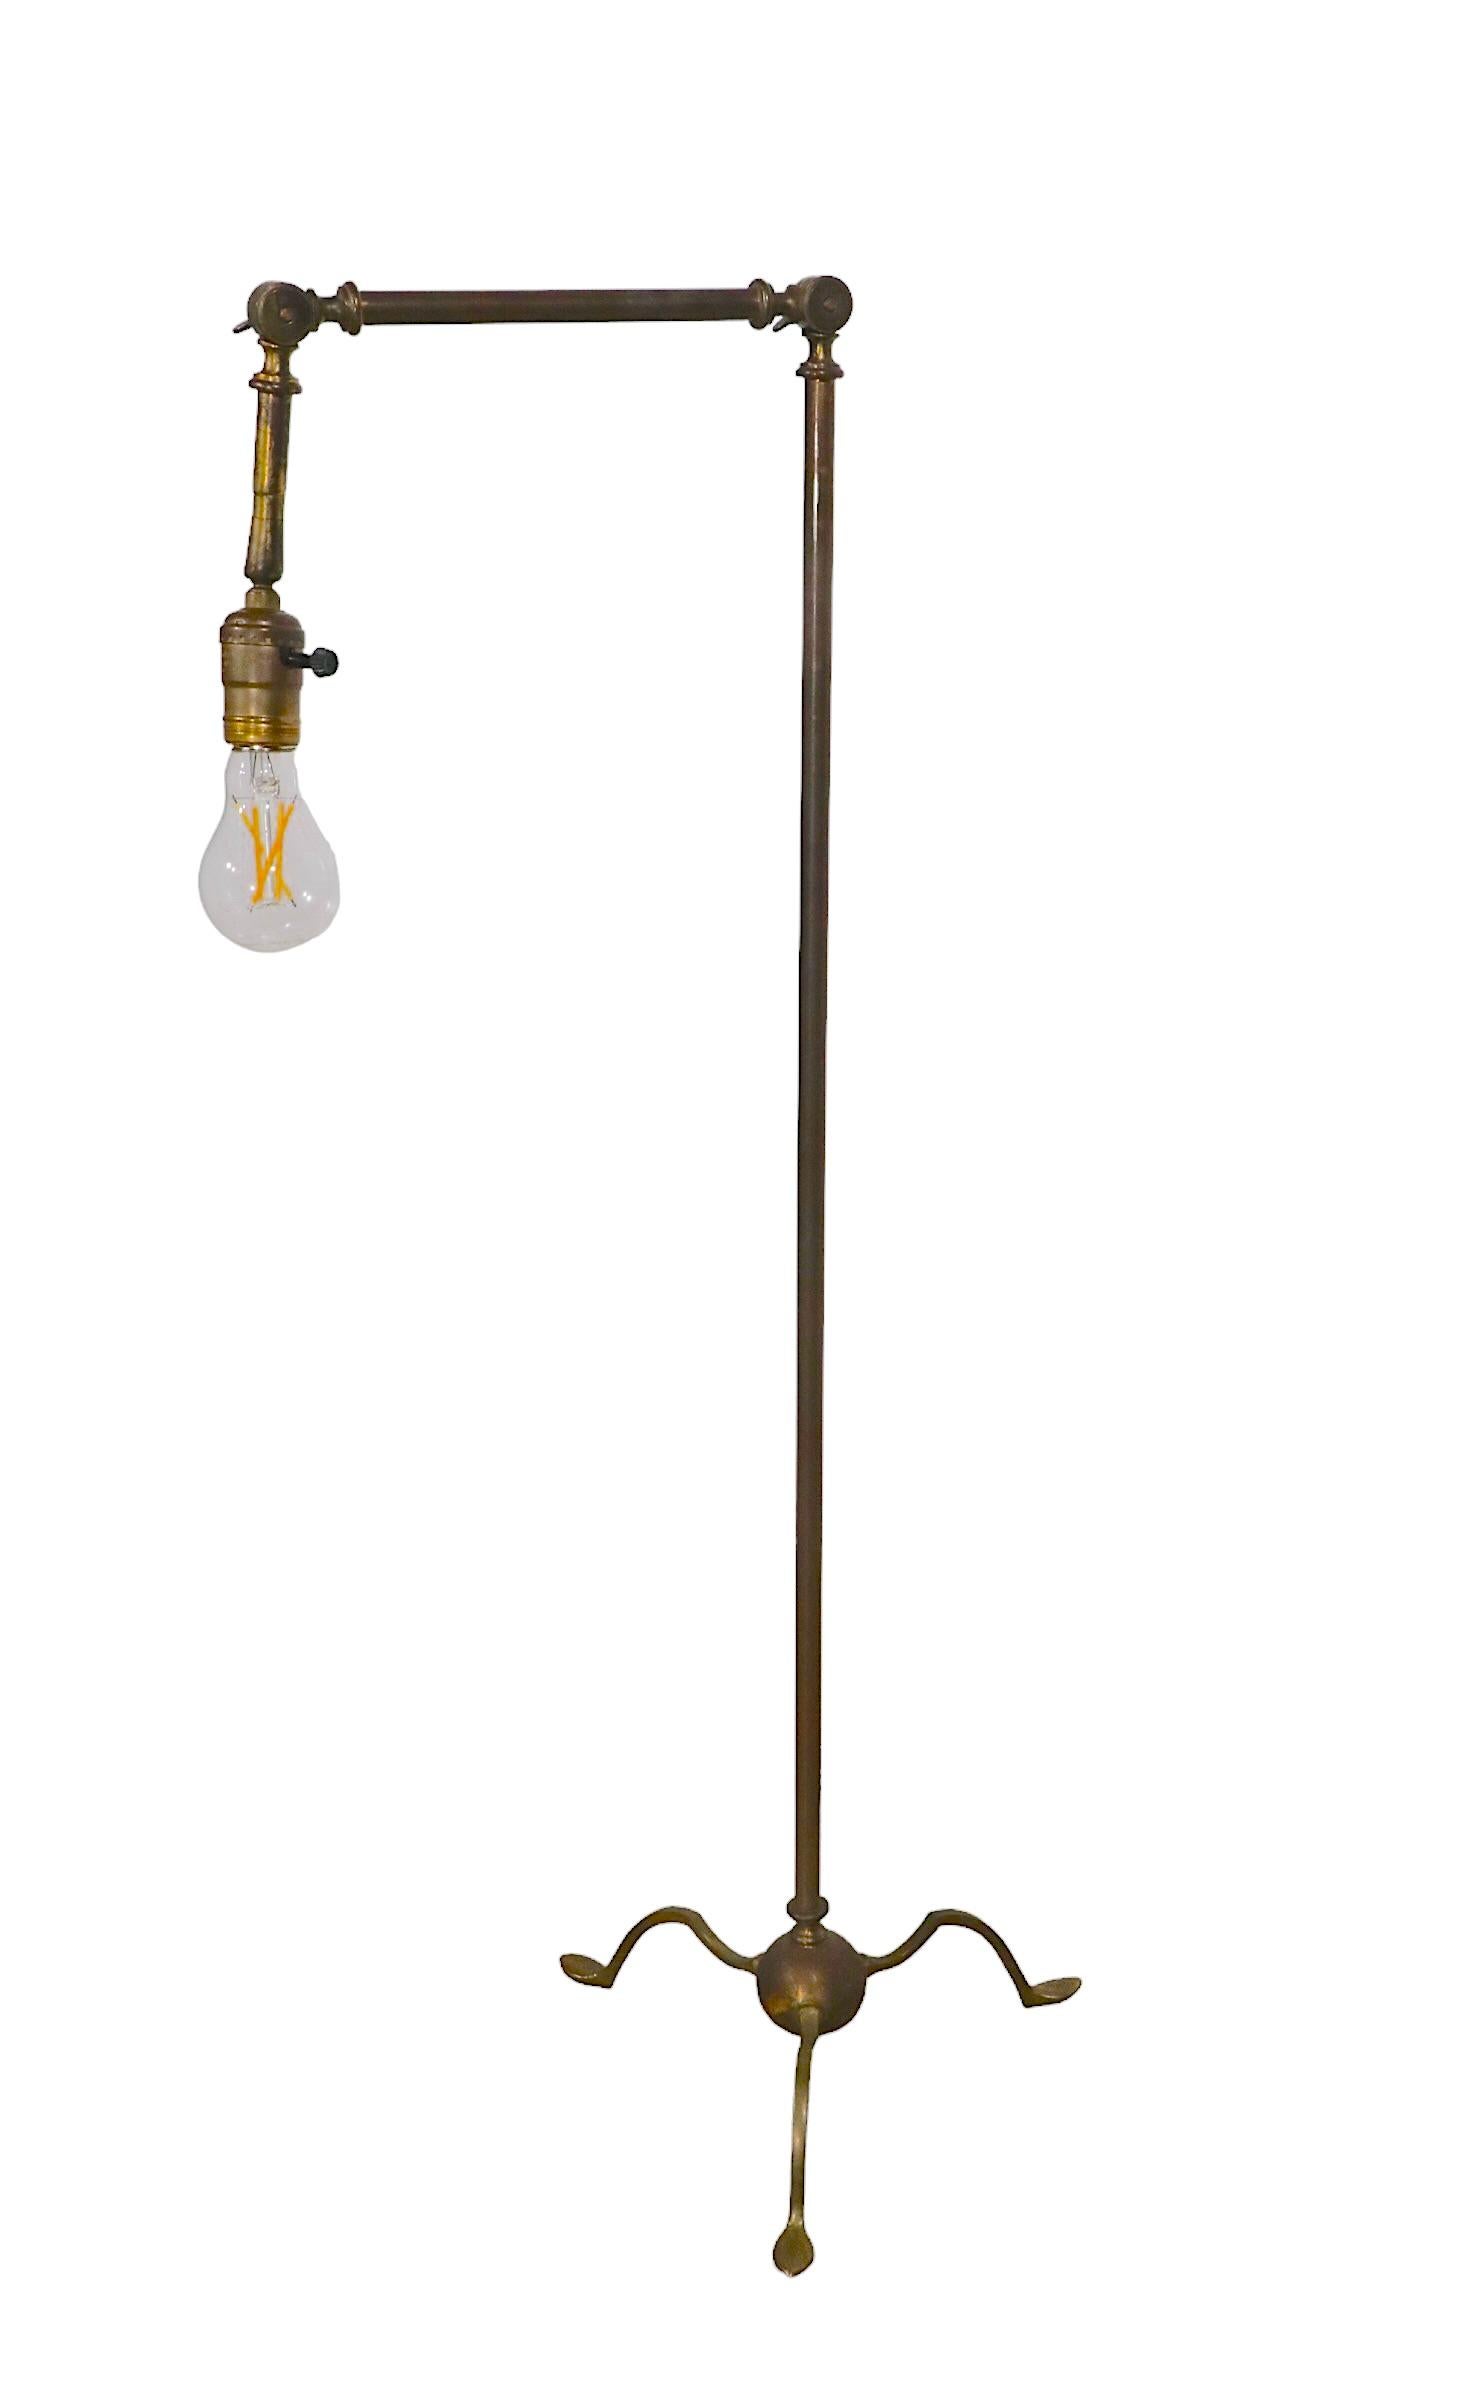 Articulating Brass Reading Floor Lamp in the Classical Style, C. 1900- 1930's For Sale 5